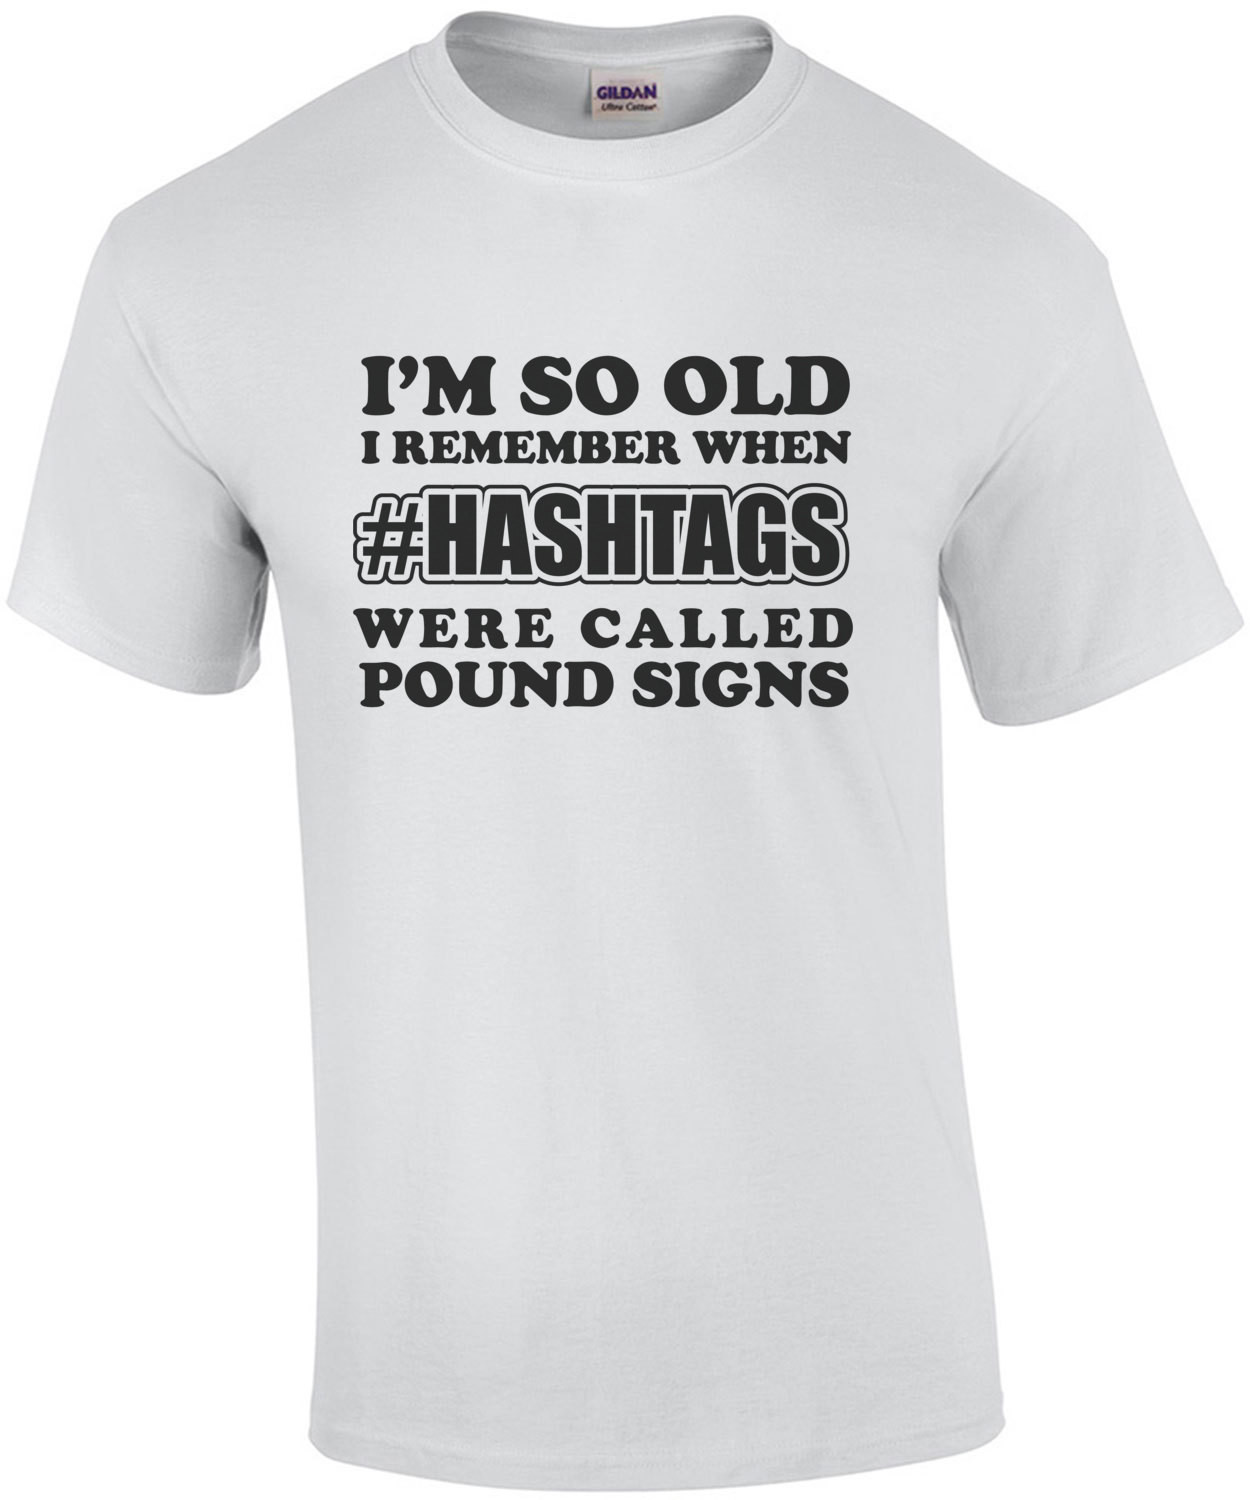 I'm so old I remember when #hashtags were called pound signs - funny